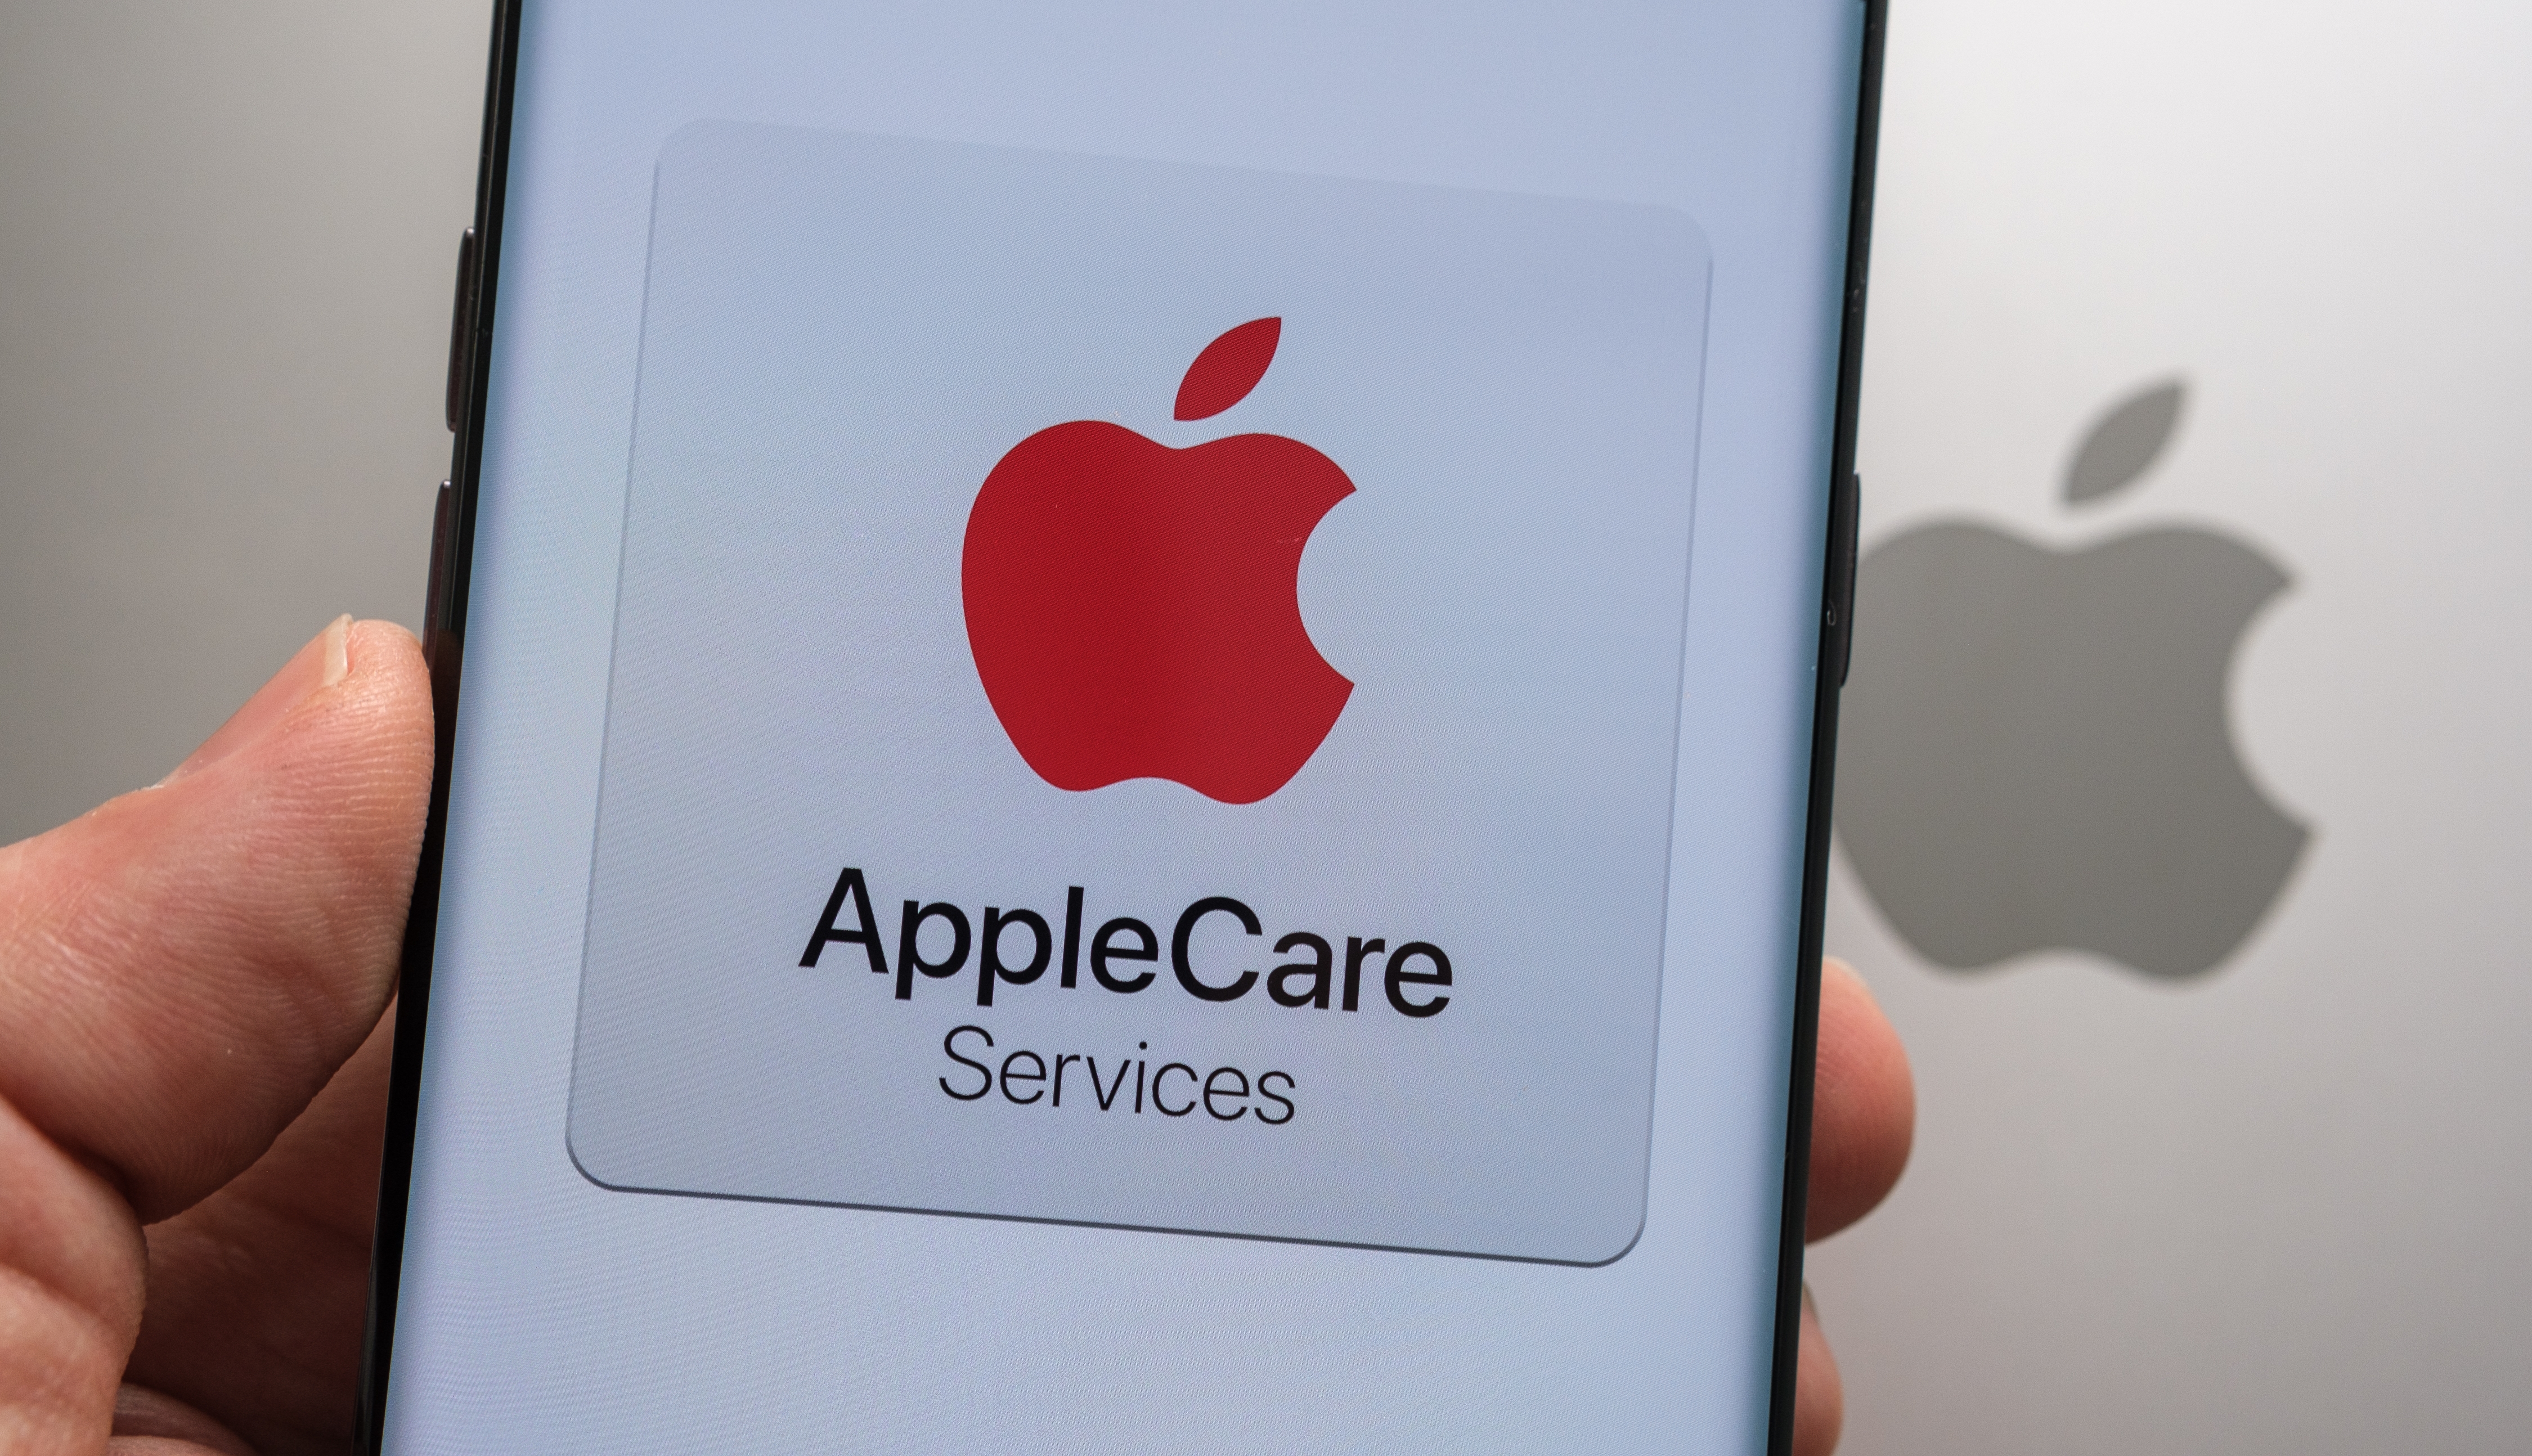 AppleCare+ vs. Mulberry Unlimited: Which is better?